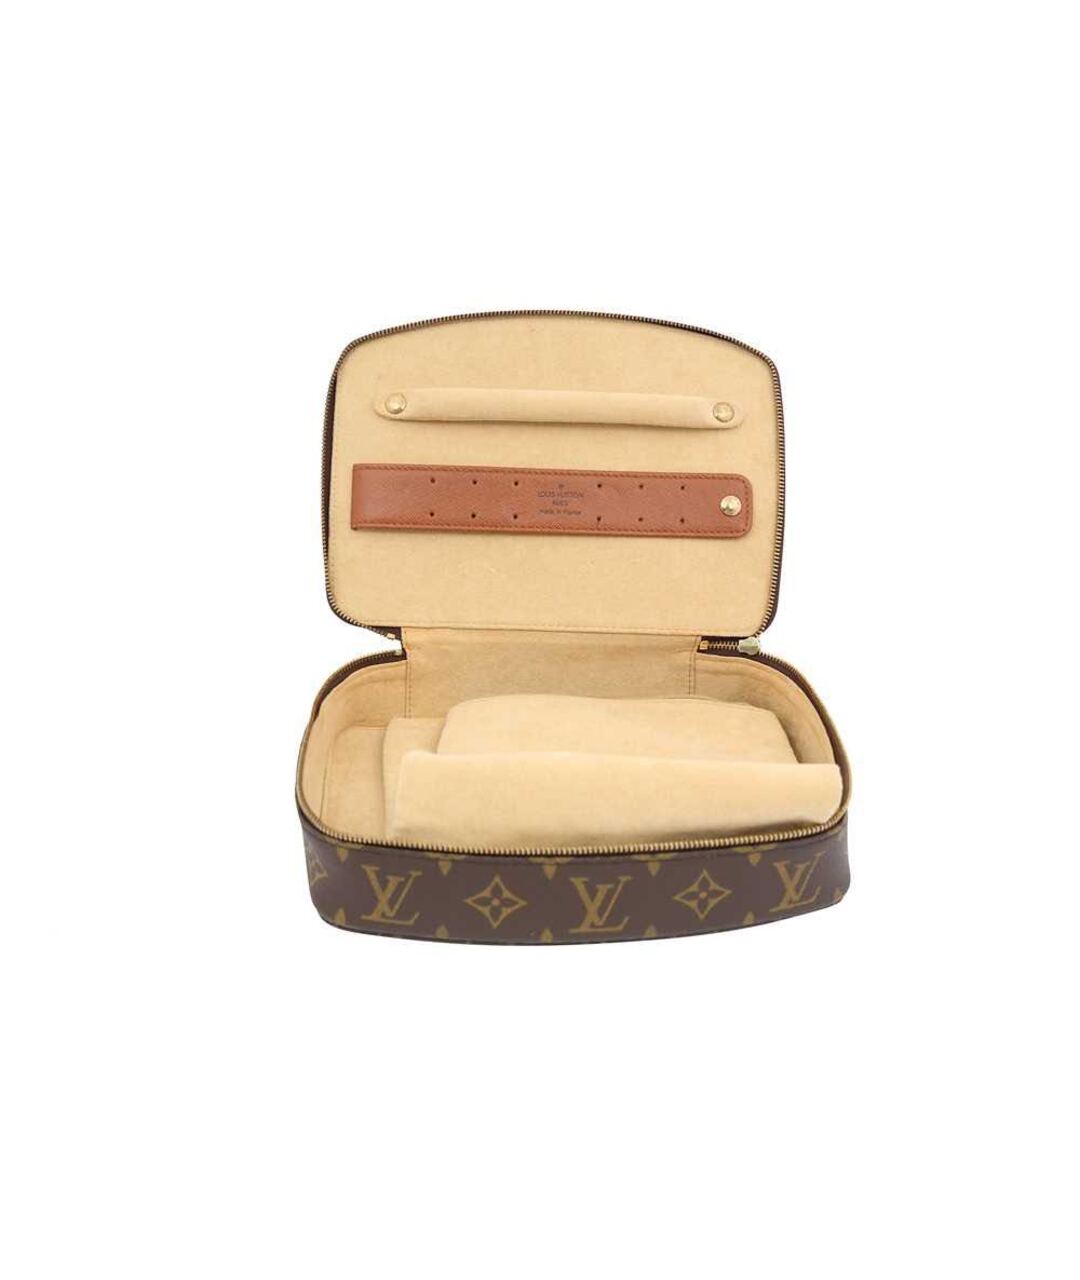 LOUIS VUITTON PRE-OWNED Косметичка, фото 2